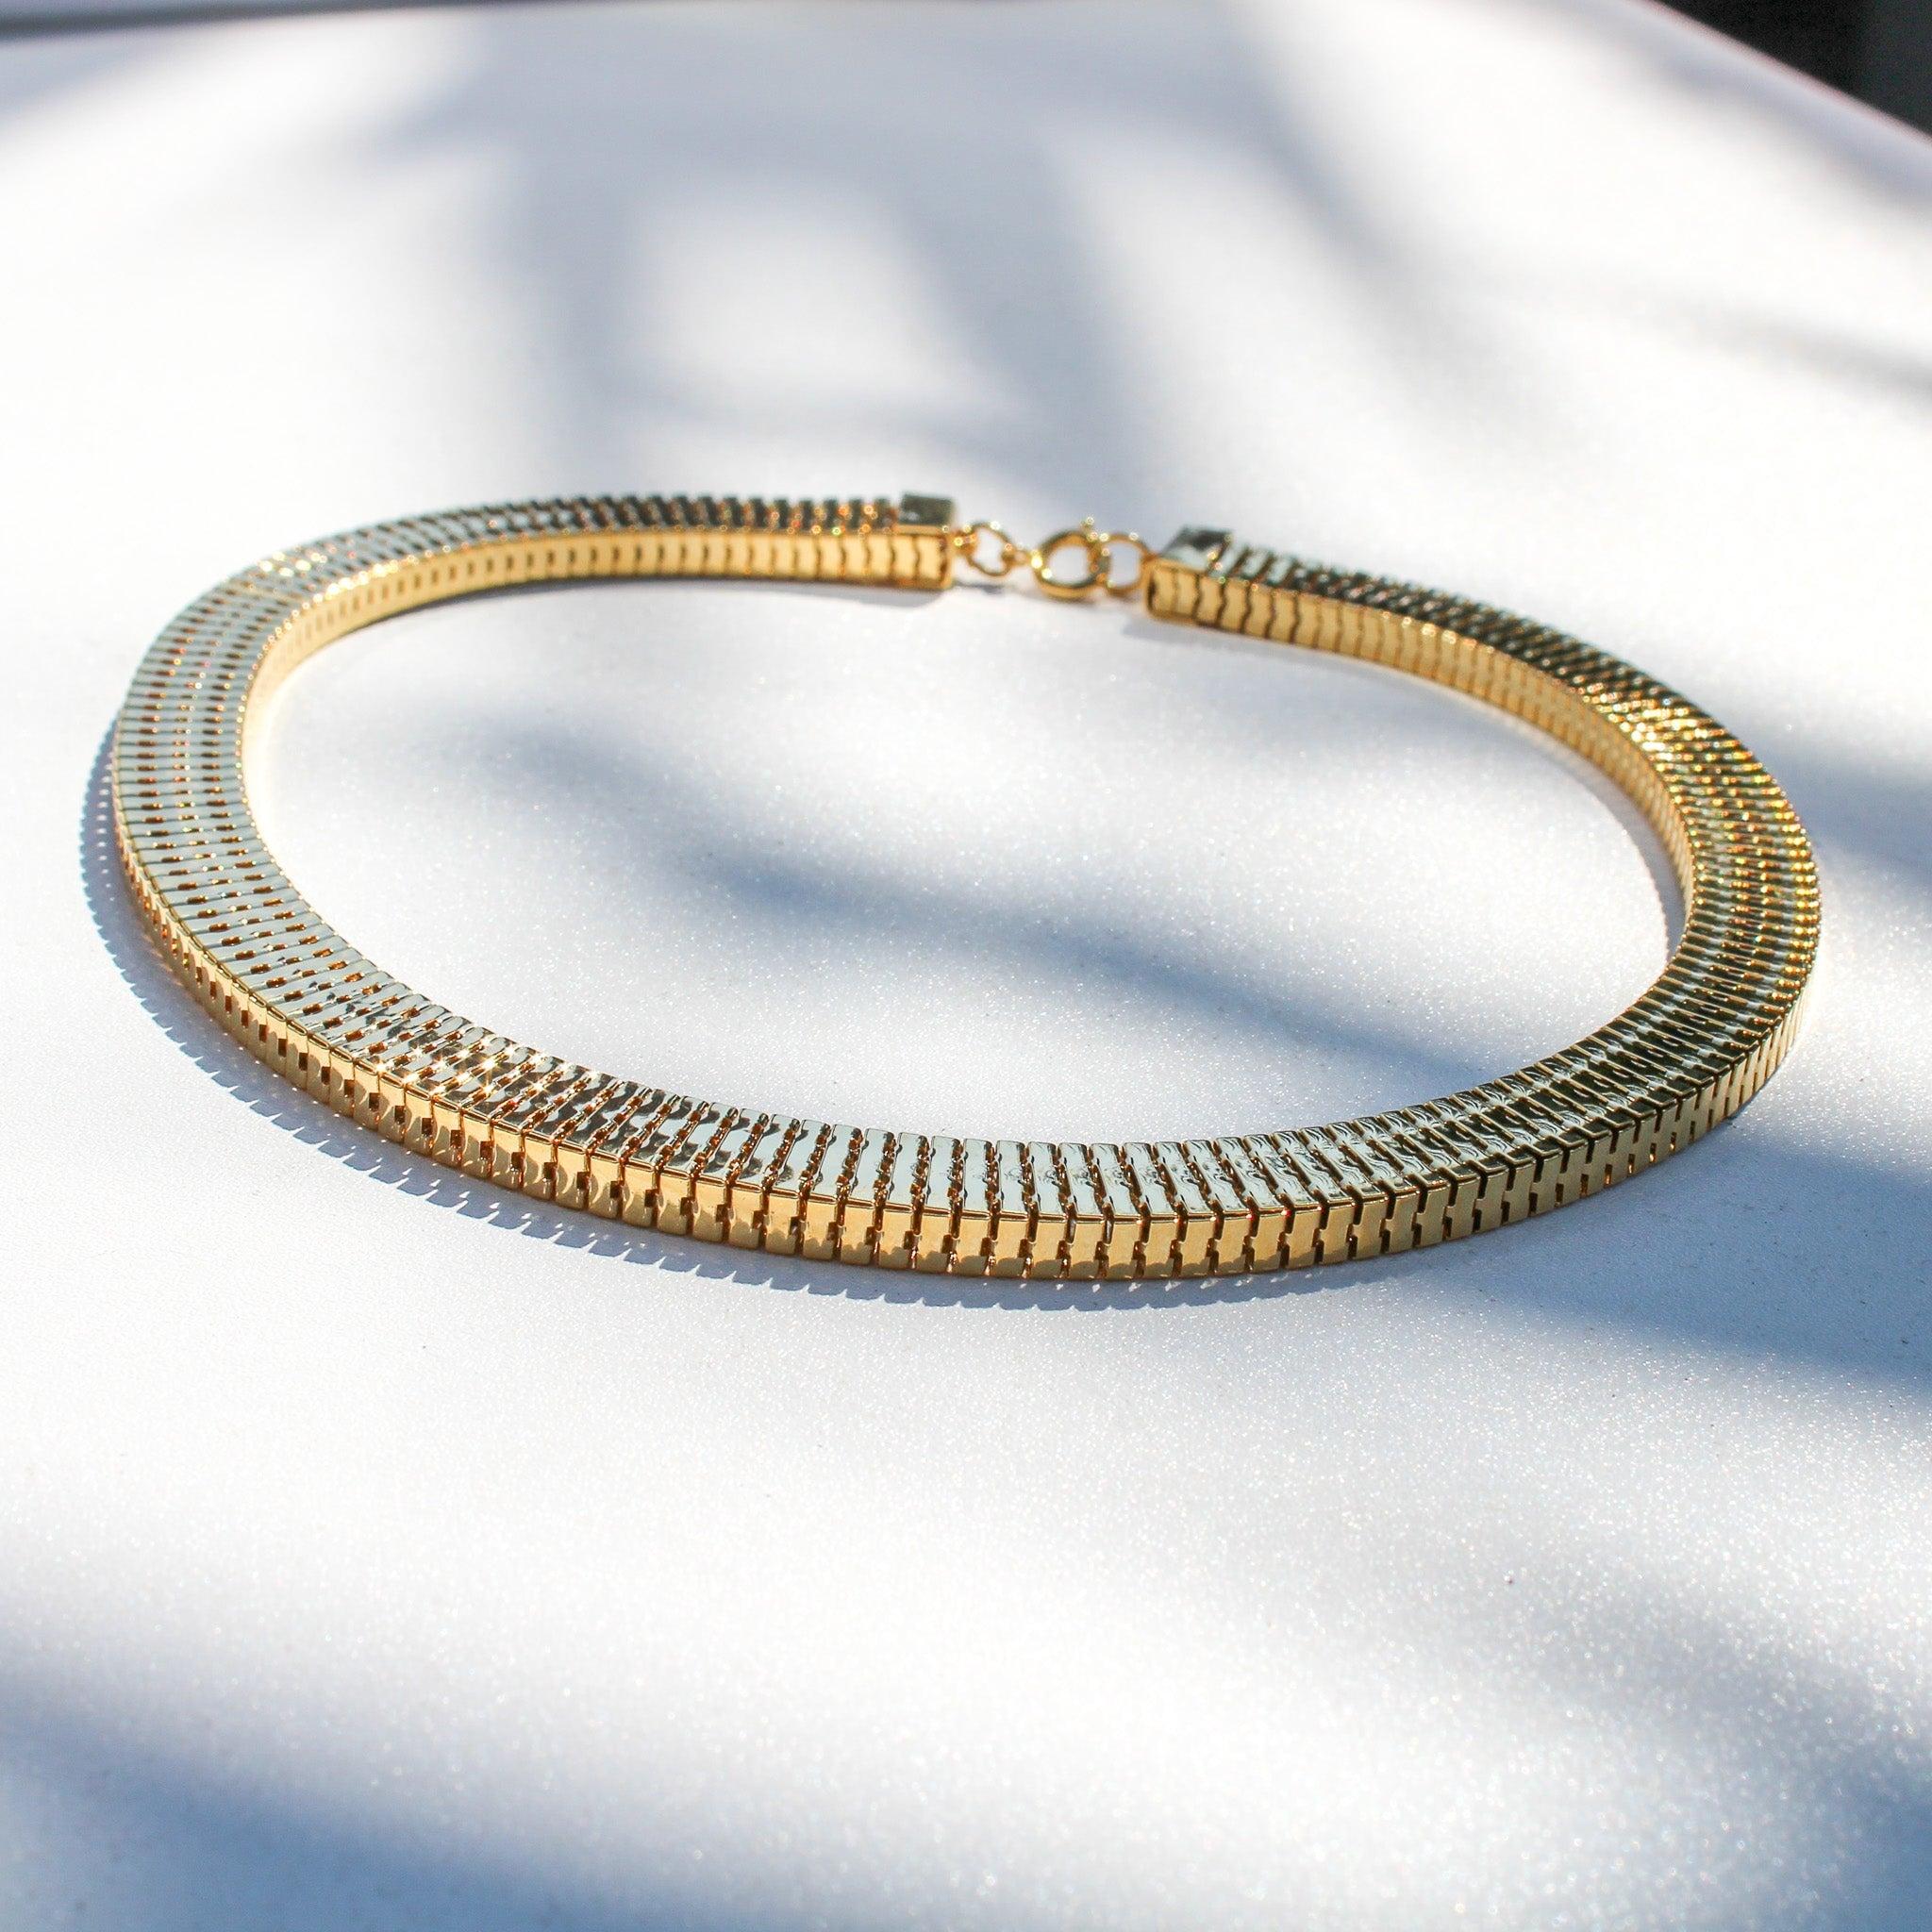 
Vintage 1970s Necklace - 18 Carat Gold Plated Deadstock
 

Step into a time machine of style with this throwback to the disco era. This effortless 1970s gold-plated choker necklace is the perfect blend of vintage and contemporary style.

Clad in an